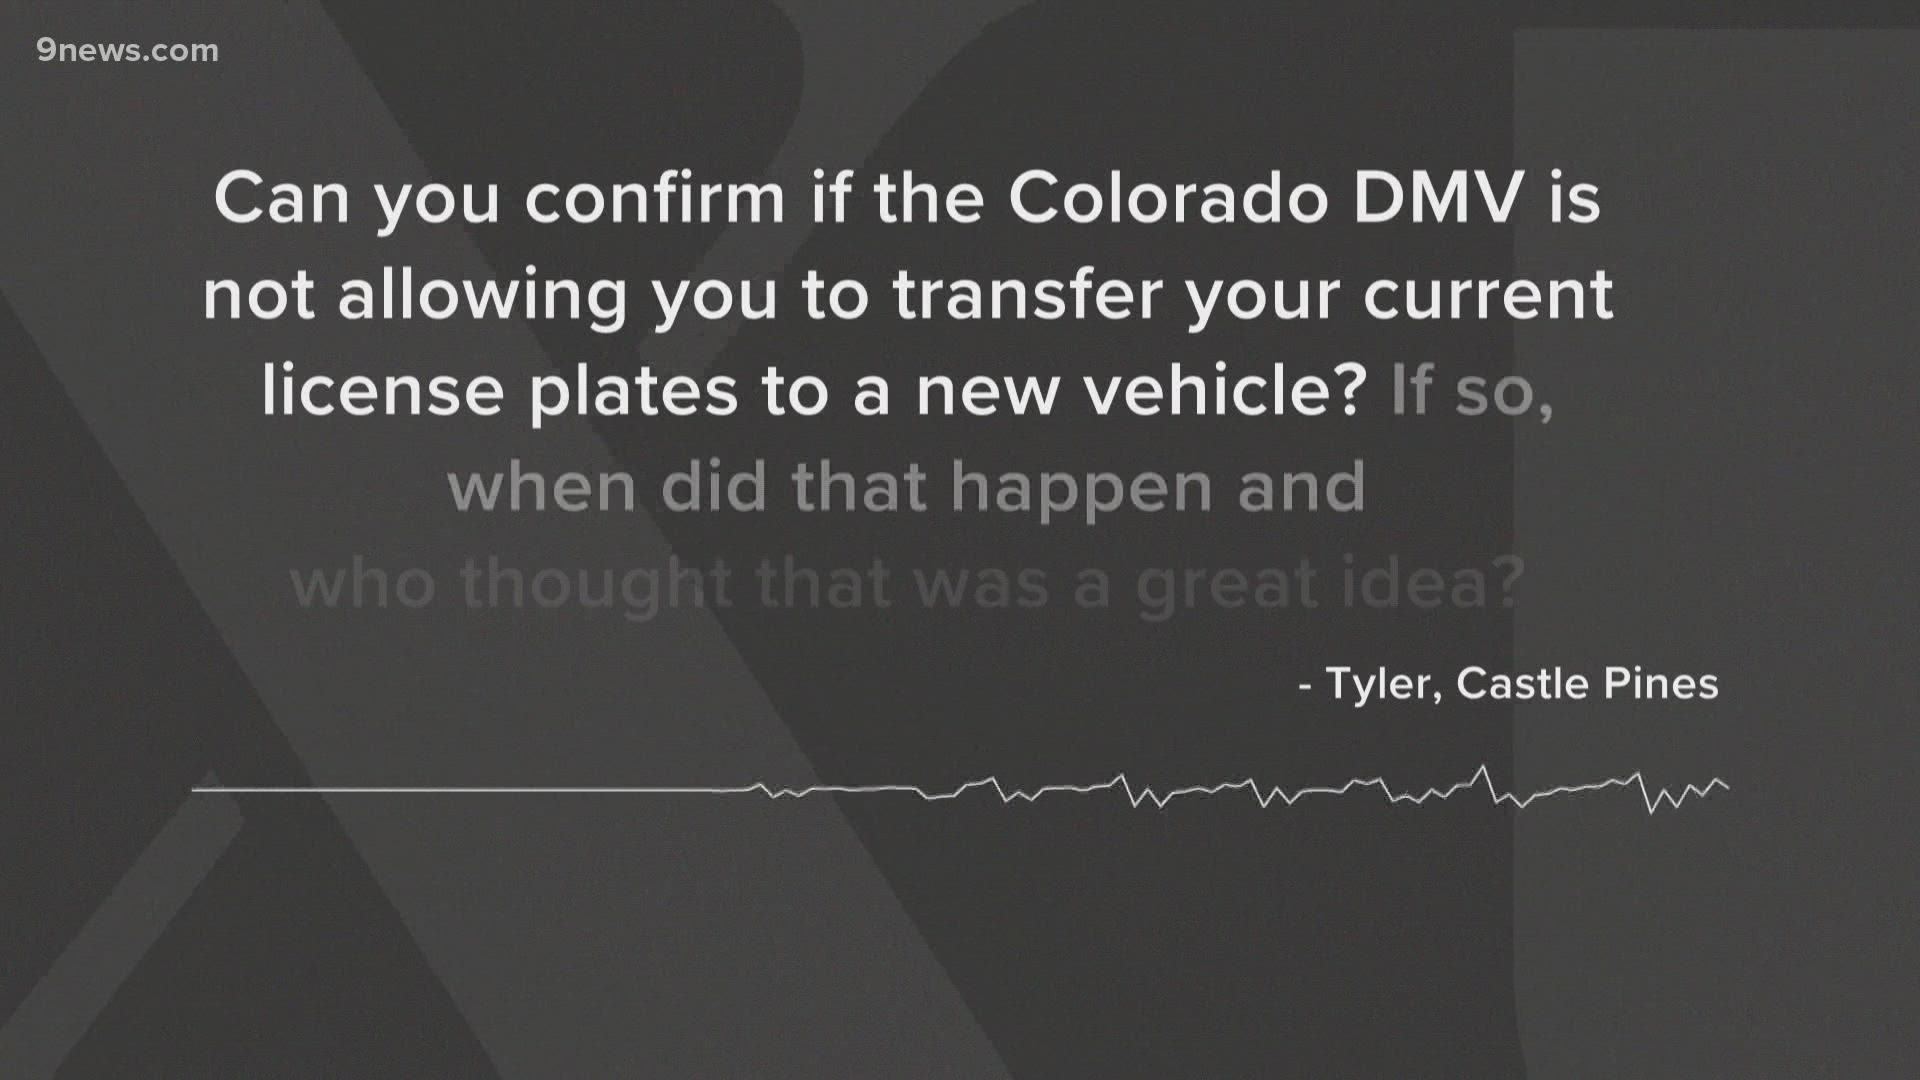 As part of a new state law, older Colorado license plates are being taken out of circulation. / Email your questions to Next@9NEWS.com.